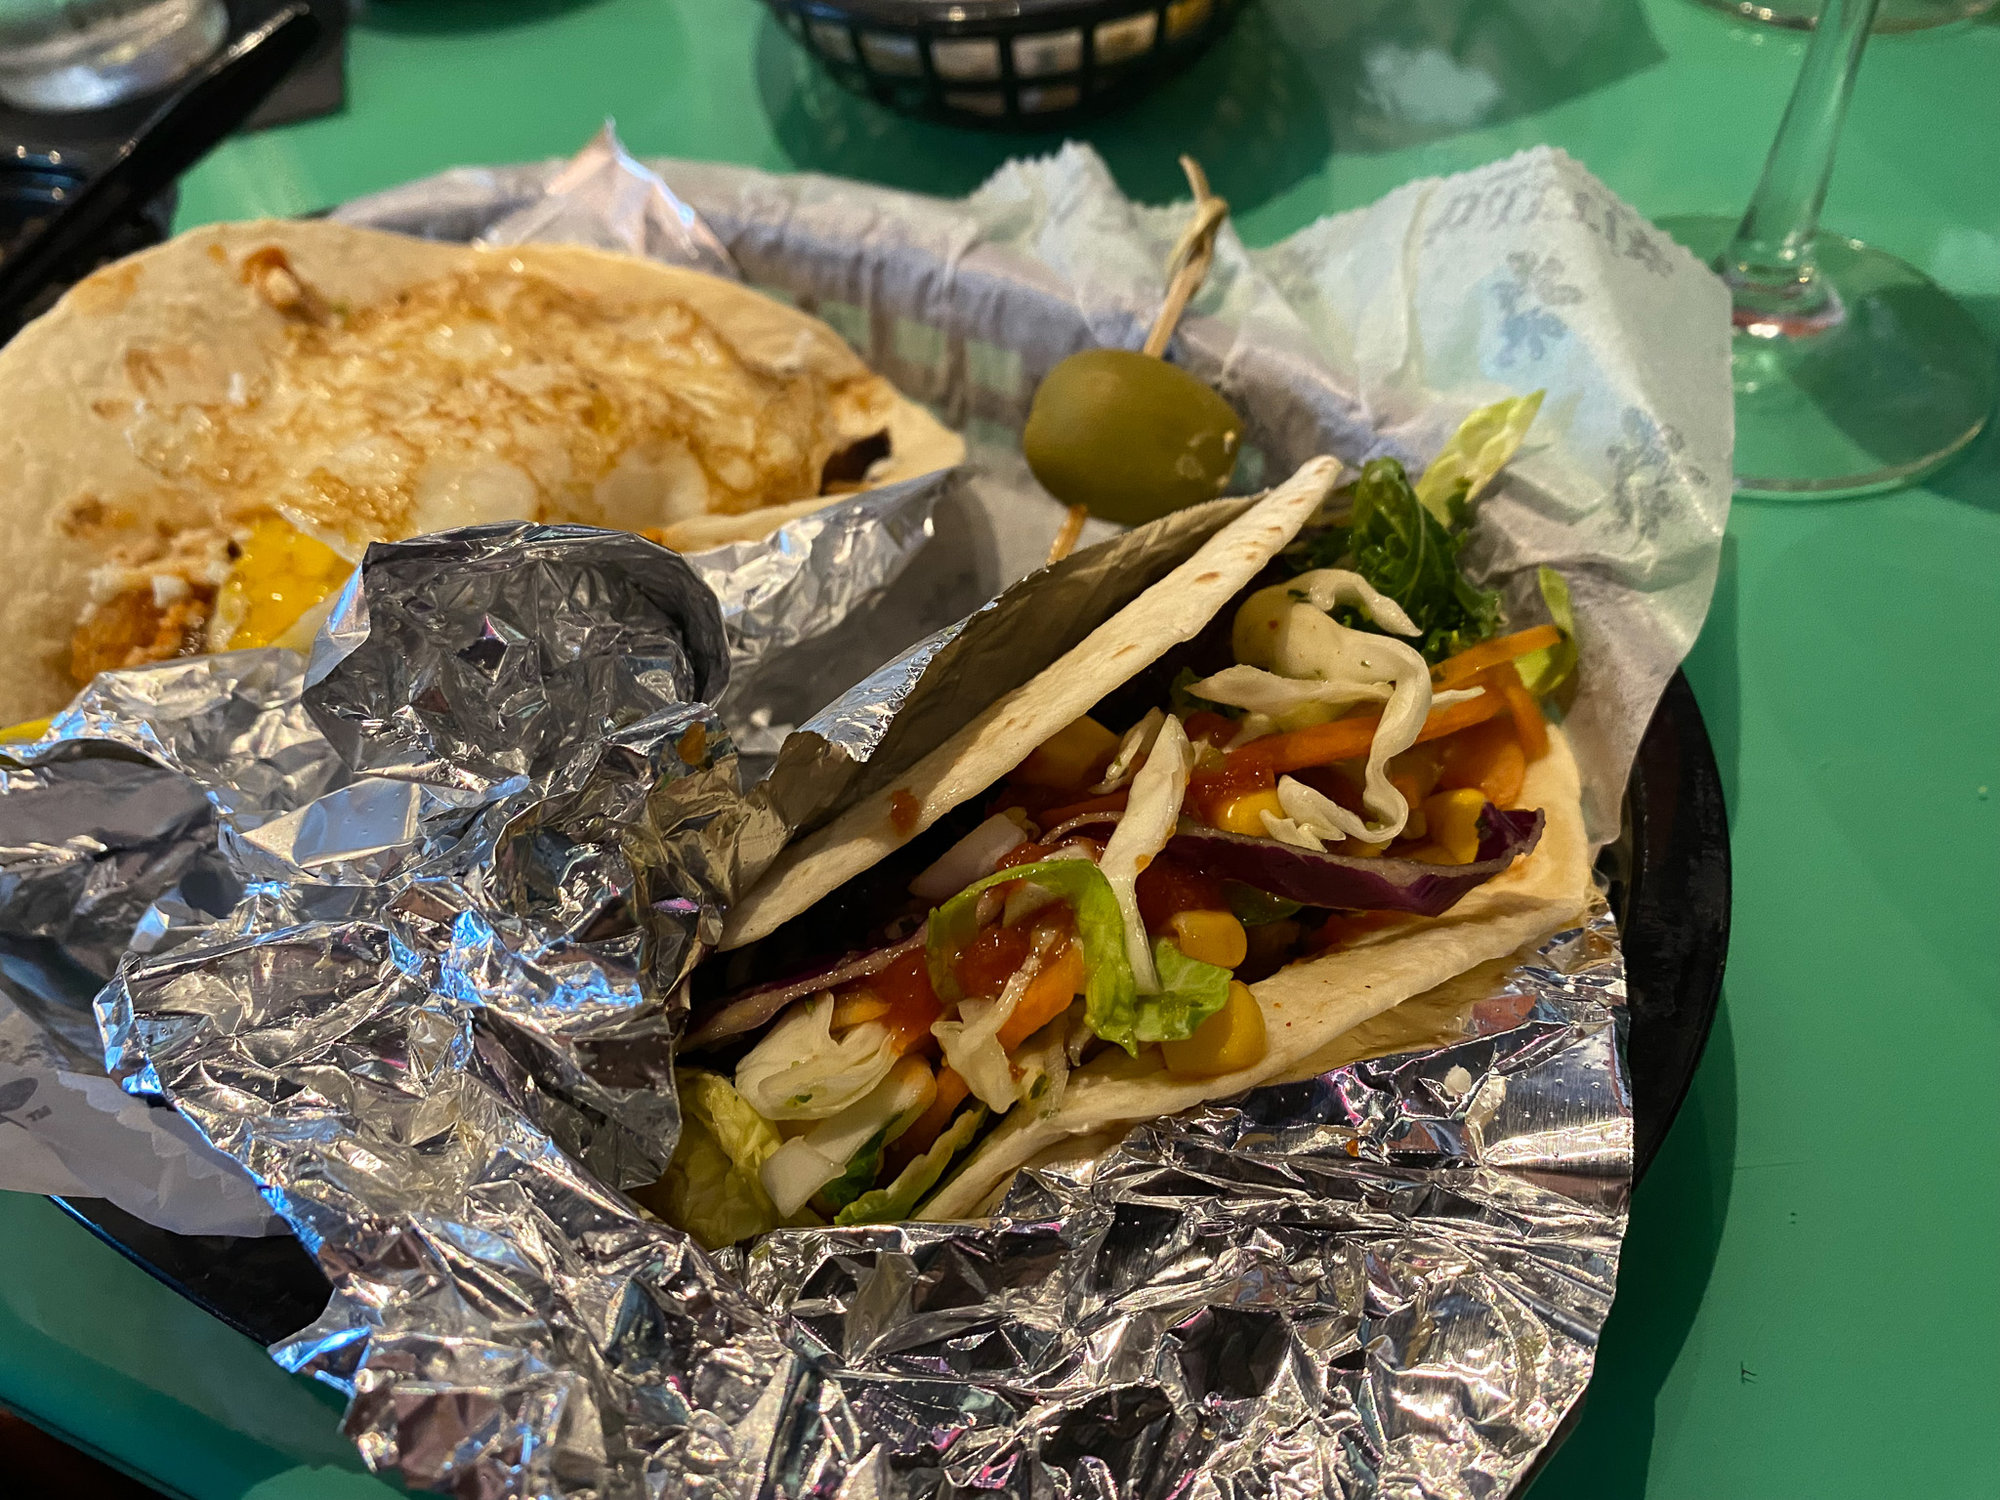 Tacos wrapped in foil slightly opened